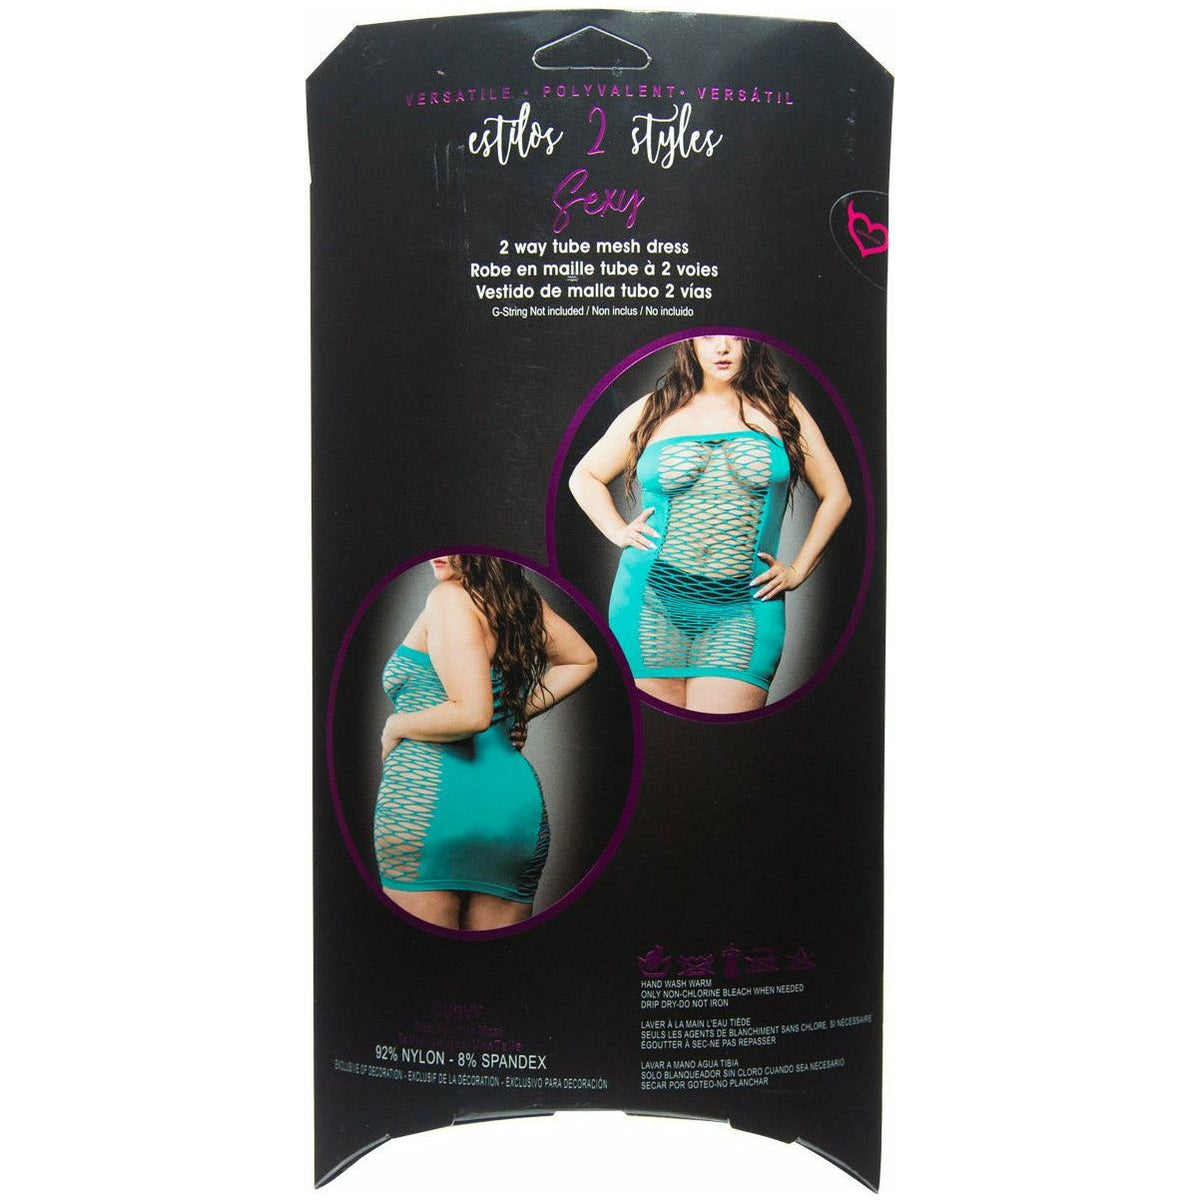 Beverly Hills Naughty Girl - 2 Way Tube Mesh Dress - Turquoise - One Size